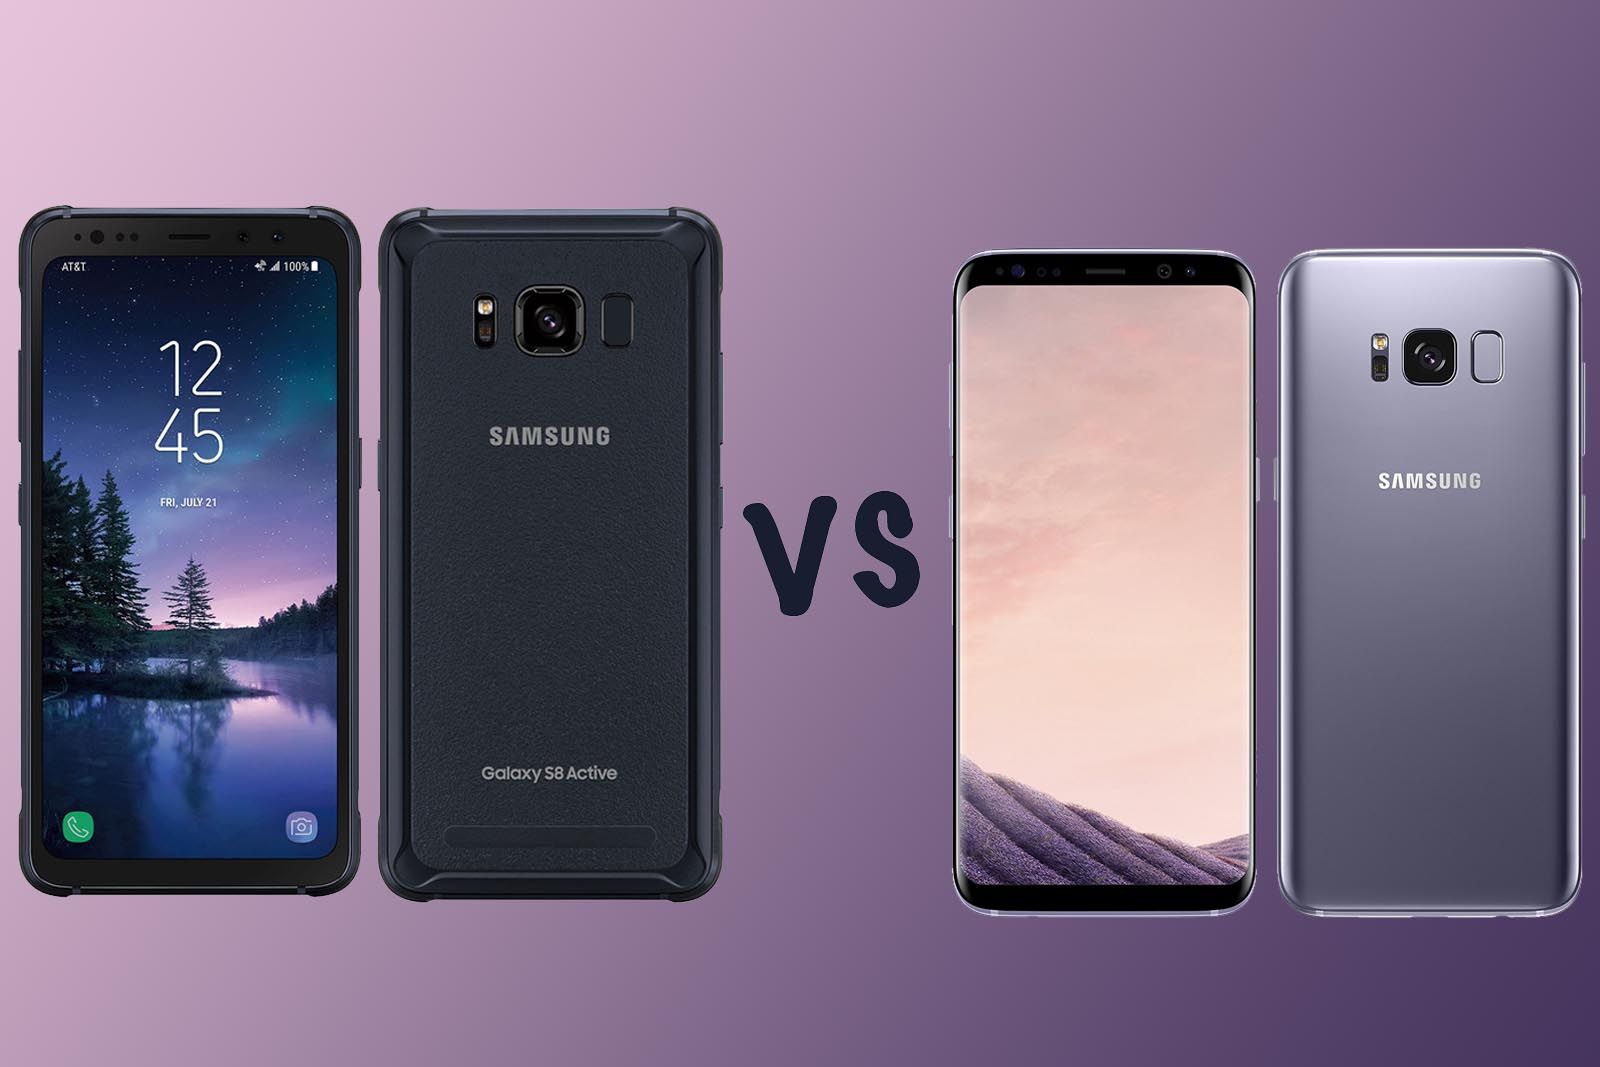 Samsung Galaxy S8 Active vs Galaxy S8 Whats the difference image 1